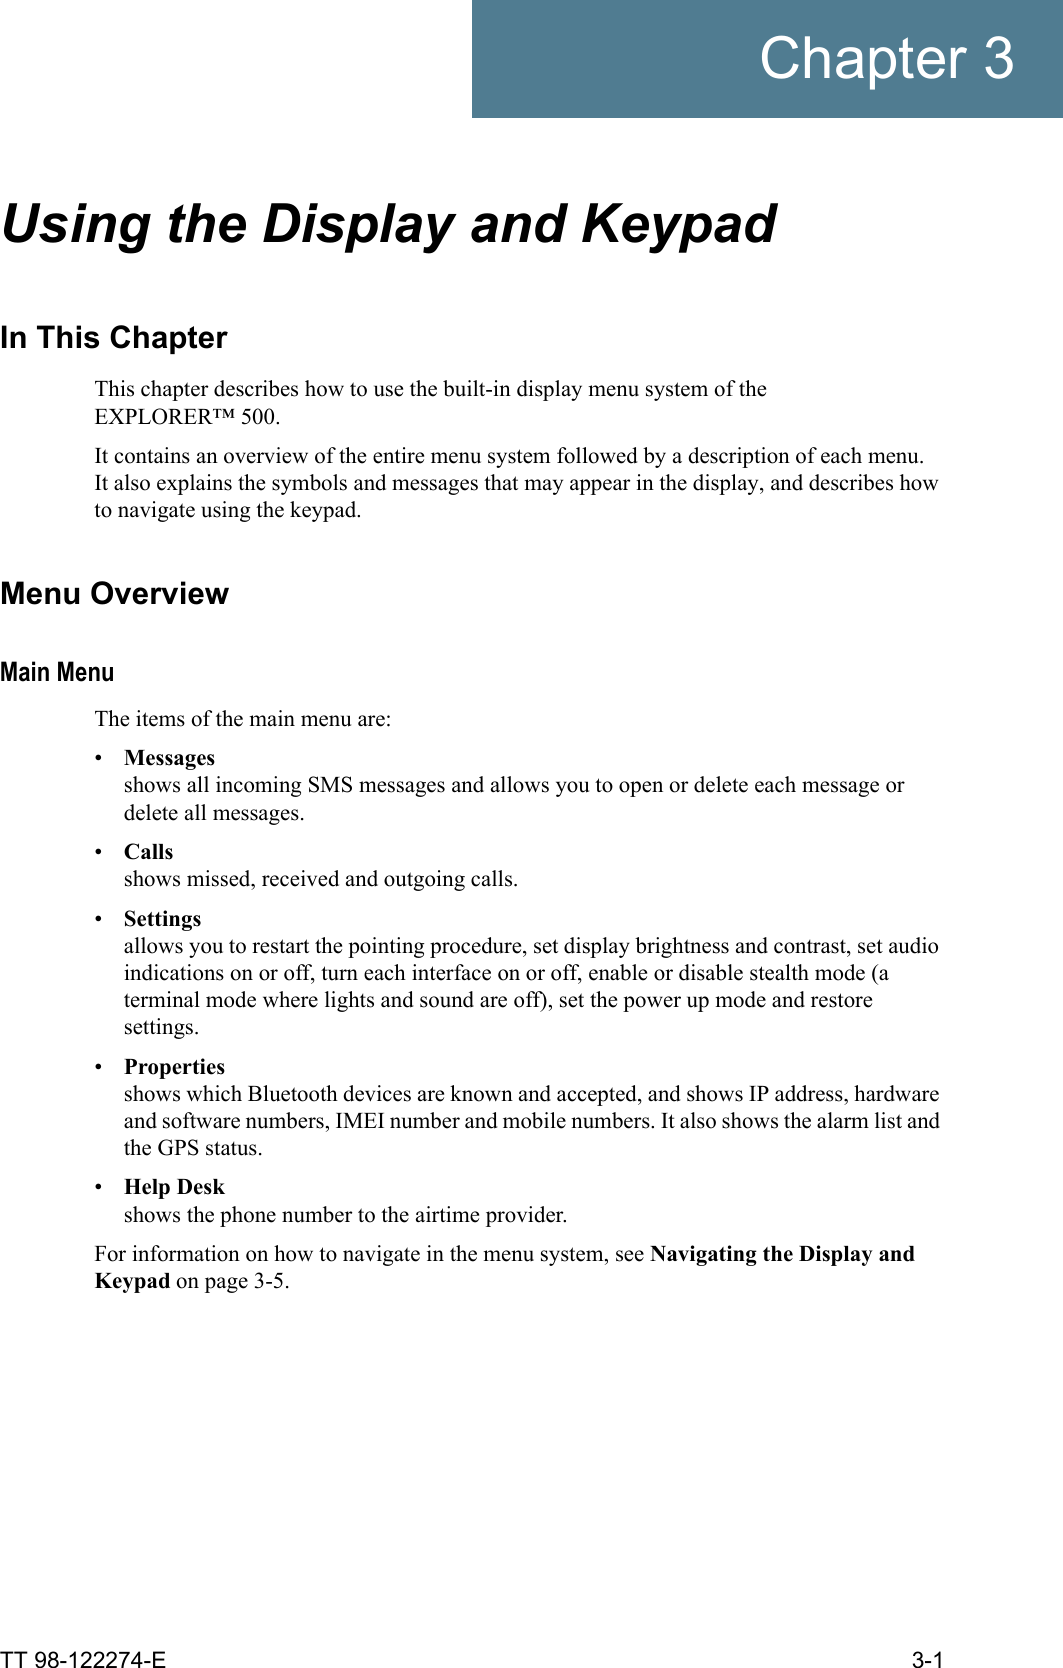 TT 98-122274-E 3-1Chapter 3Using the Display and Keypad 3In This ChapterThis chapter describes how to use the built-in display menu system of the EXPLORER™ 500. It contains an overview of the entire menu system followed by a description of each menu.It also explains the symbols and messages that may appear in the display, and describes how to navigate using the keypad.Menu OverviewMain MenuThe items of the main menu are:•Messagesshows all incoming SMS messages and allows you to open or delete each message or delete all messages.•Callsshows missed, received and outgoing calls.•Settingsallows you to restart the pointing procedure, set display brightness and contrast, set audio indications on or off, turn each interface on or off, enable or disable stealth mode (a terminal mode where lights and sound are off), set the power up mode and restore settings.•Propertiesshows which Bluetooth devices are known and accepted, and shows IP address, hardware and software numbers, IMEI number and mobile numbers. It also shows the alarm list and the GPS status.•Help Deskshows the phone number to the airtime provider.For information on how to navigate in the menu system, see Navigating the Display and Keypad on page 3-5.